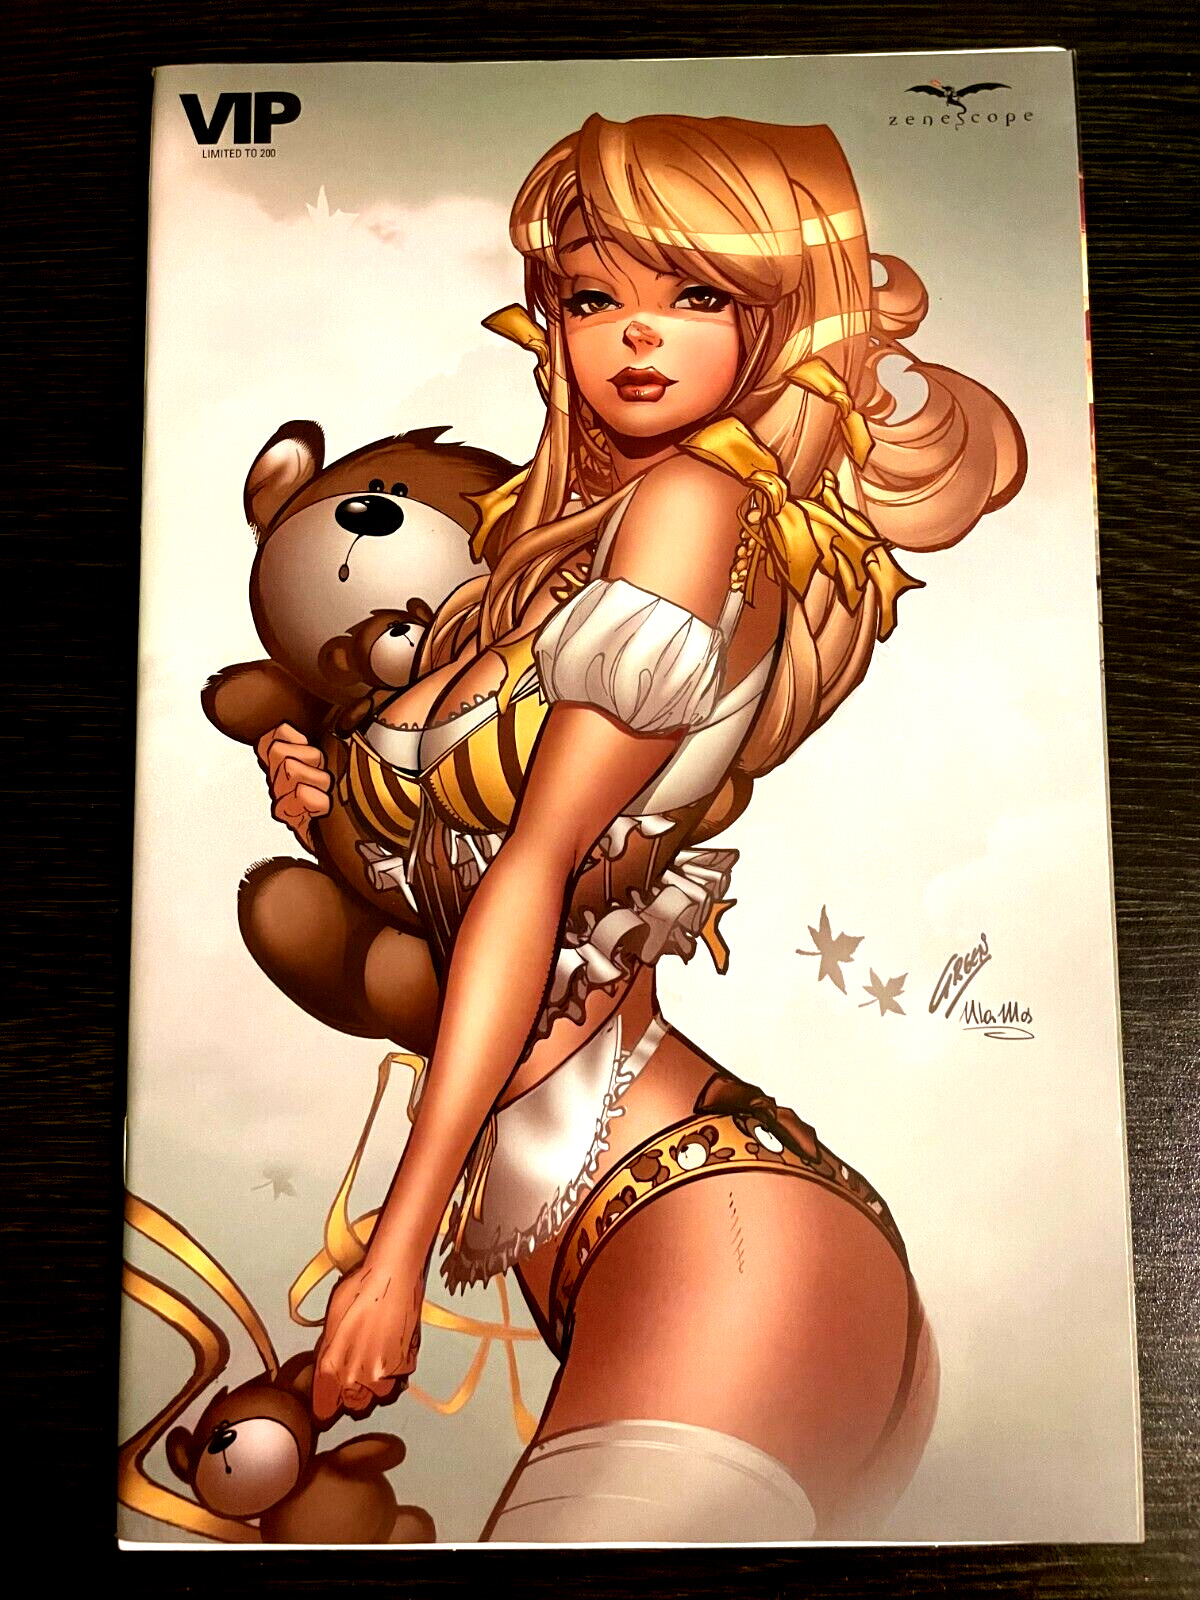 ZENESCOPE GFT#1 MYTHS AND LEGENDS PAUL GREEN VIP EXCLUSIVE COVER LTD 200 NM+